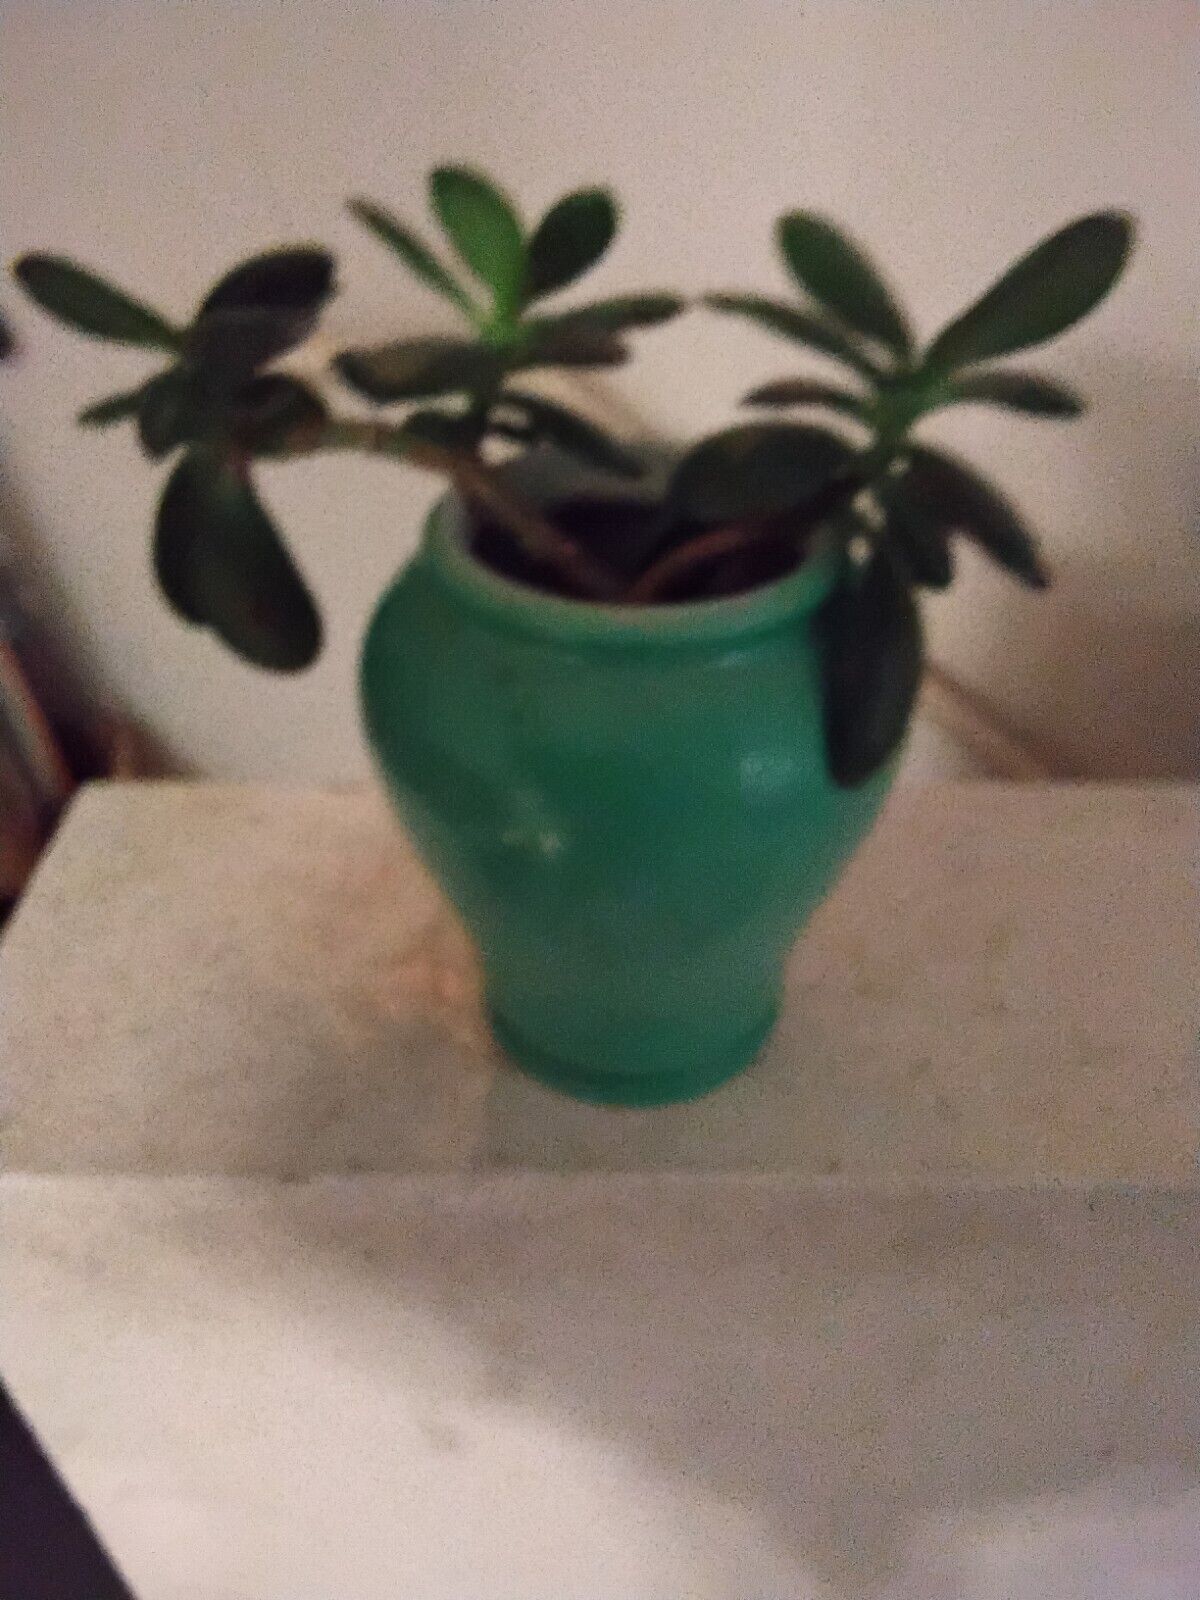 Small Green  Ceramic Planter Perfect For A Desk Or Table